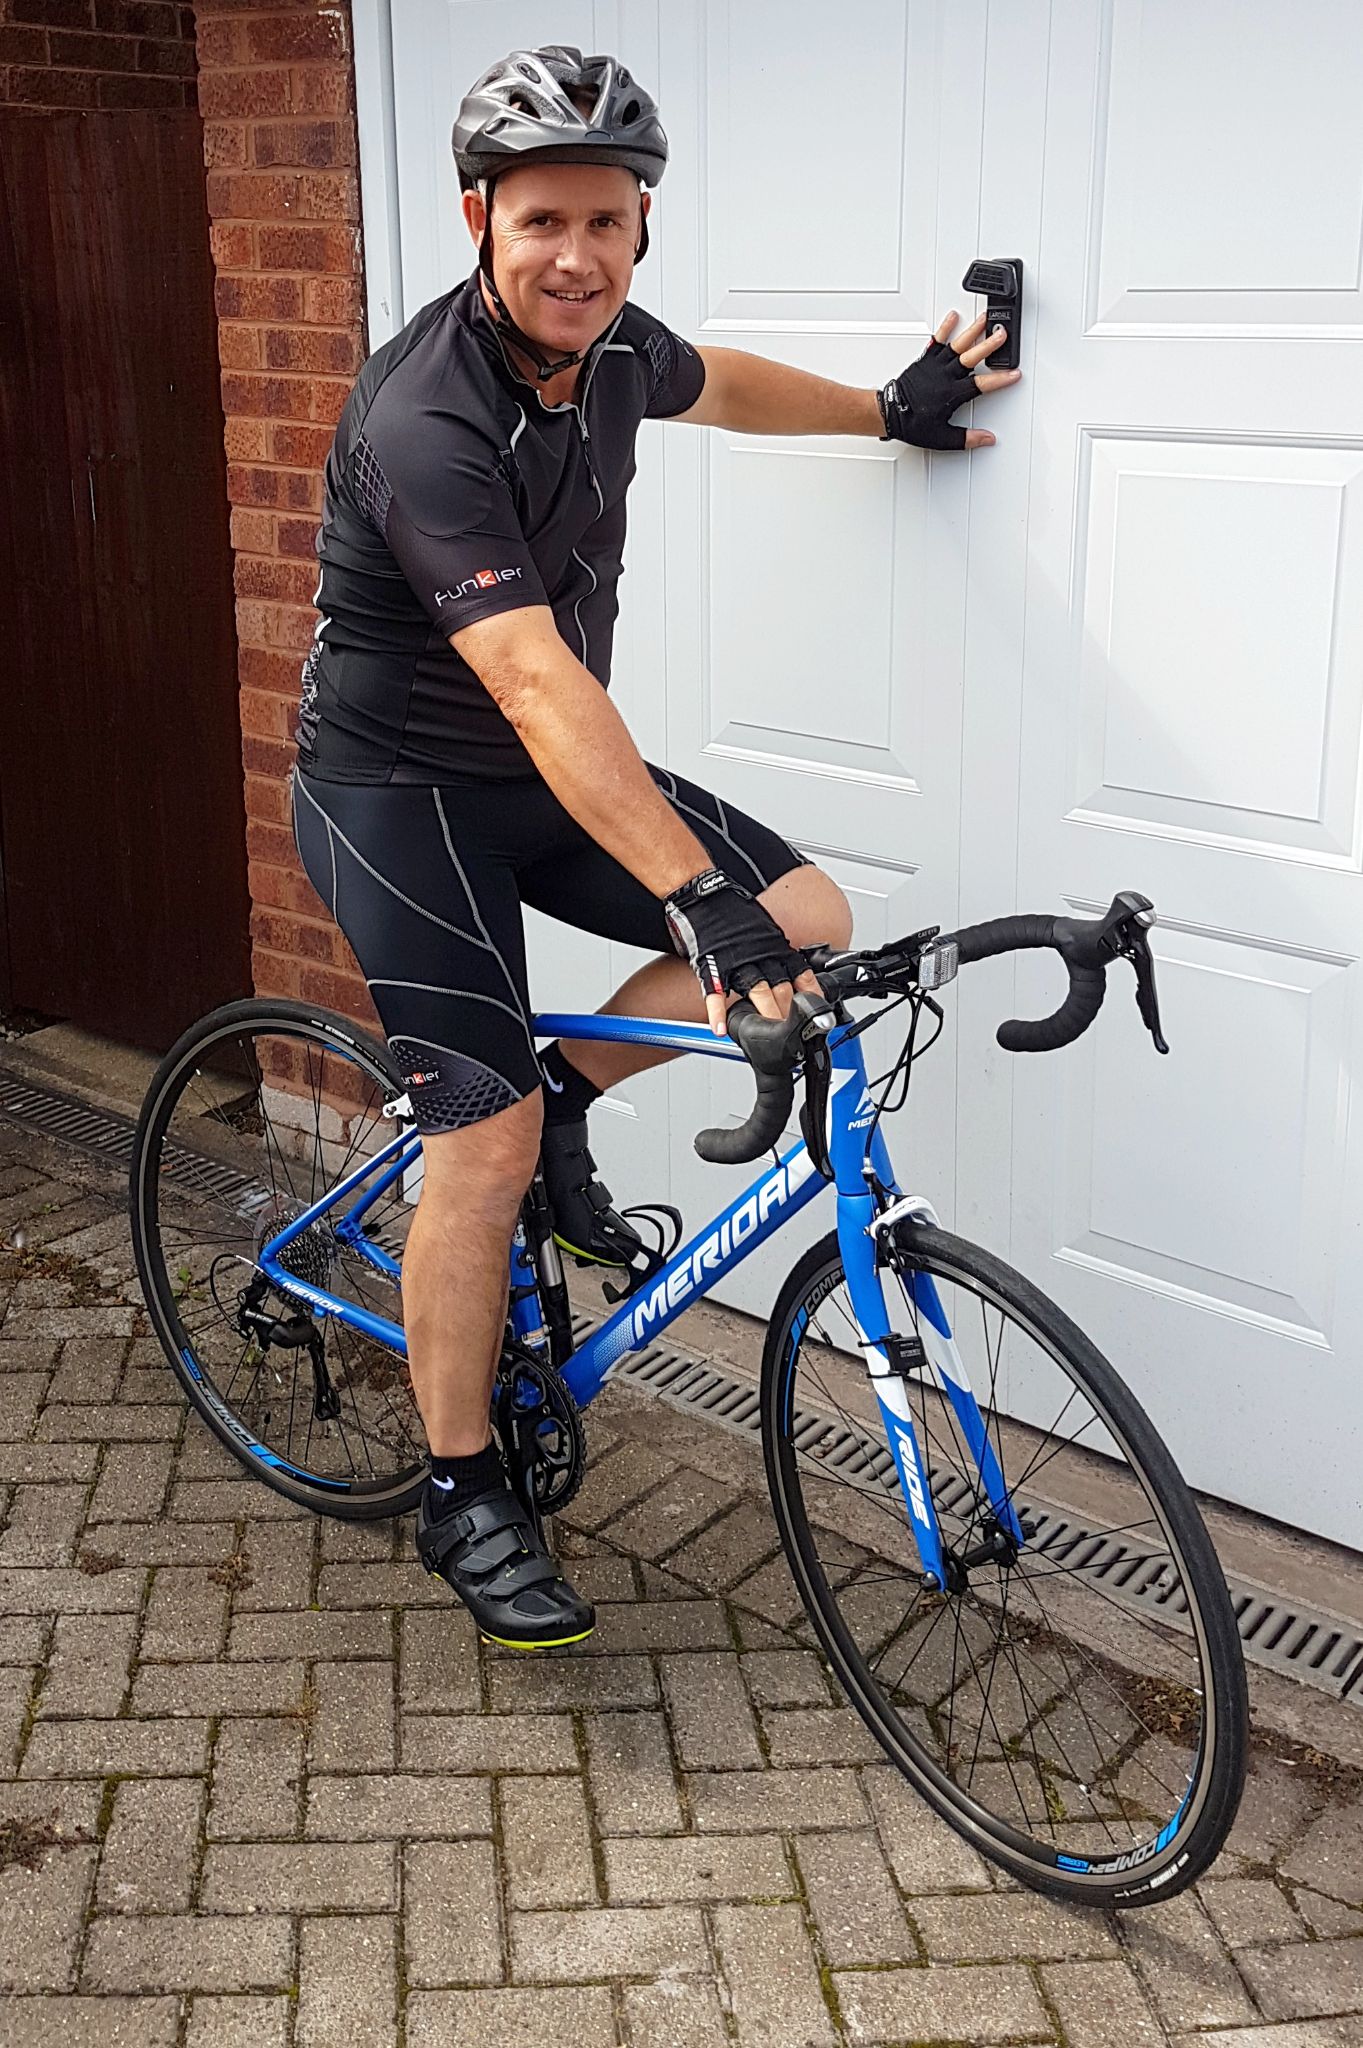 Building services engineer gets on his bike for epic charity ride